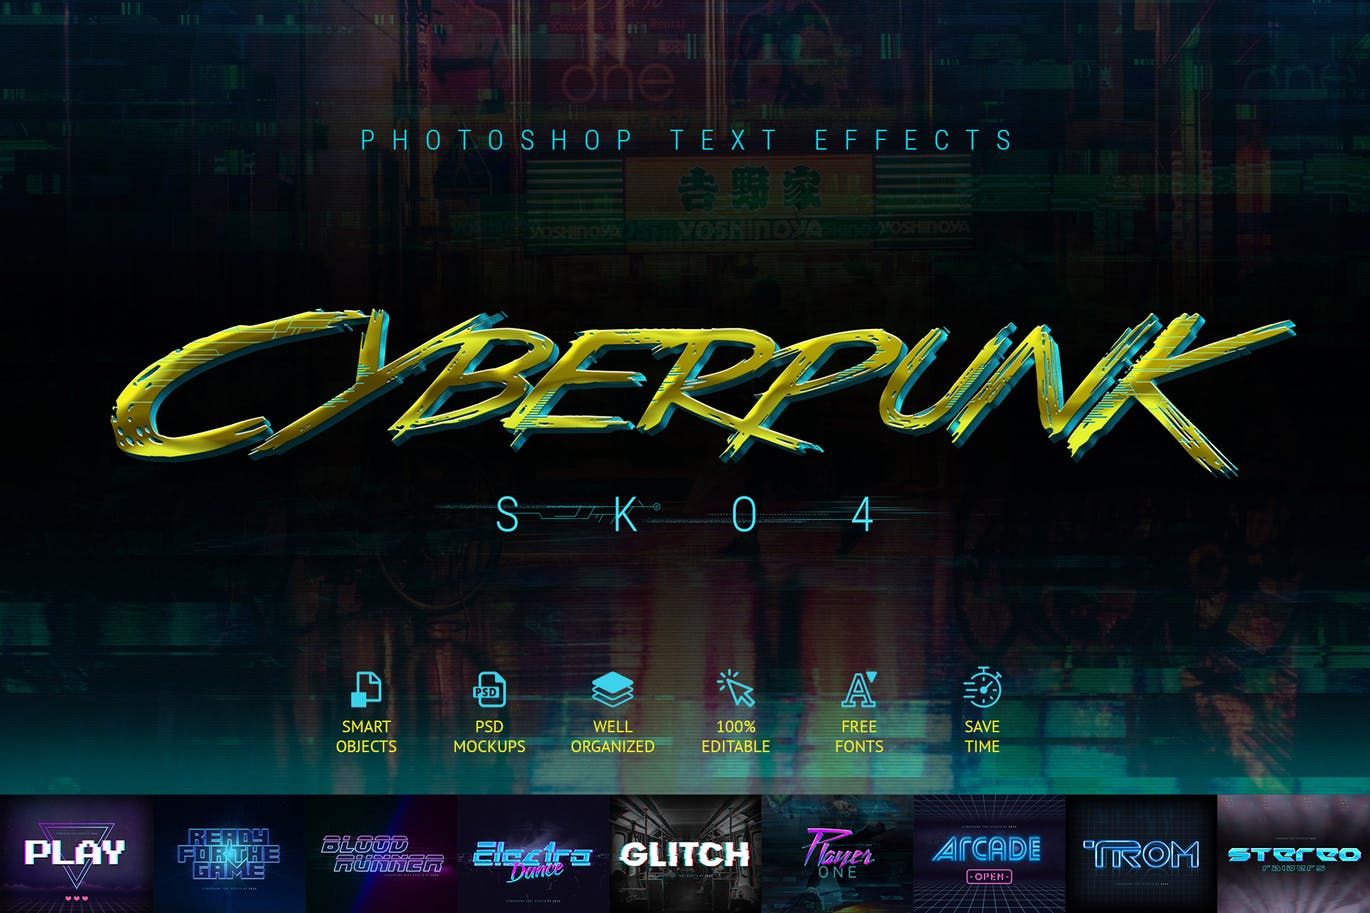 A retro cyberpunk text effects for photoshop